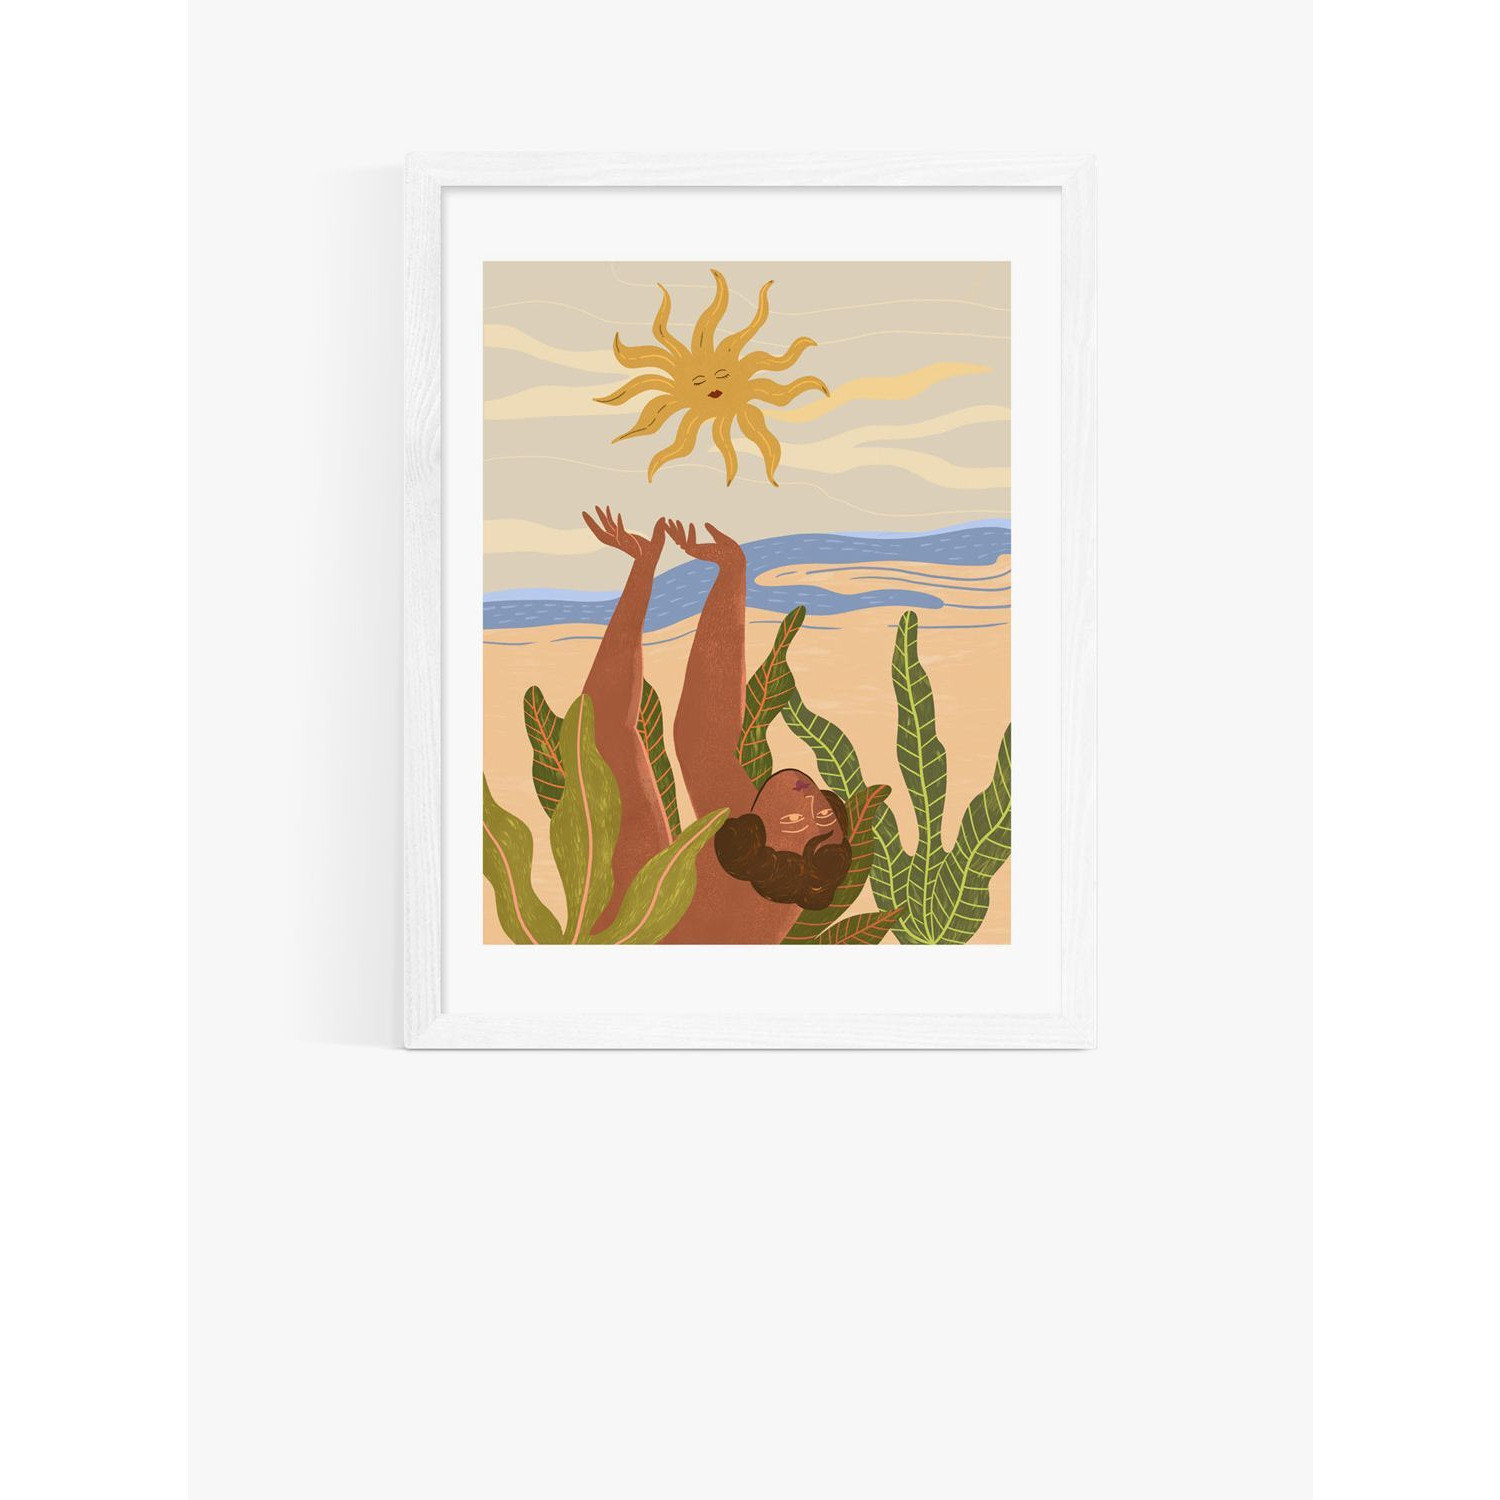 EAST END PRINTS Arty Guava 'Worship the Sun' Framed Print - image 1